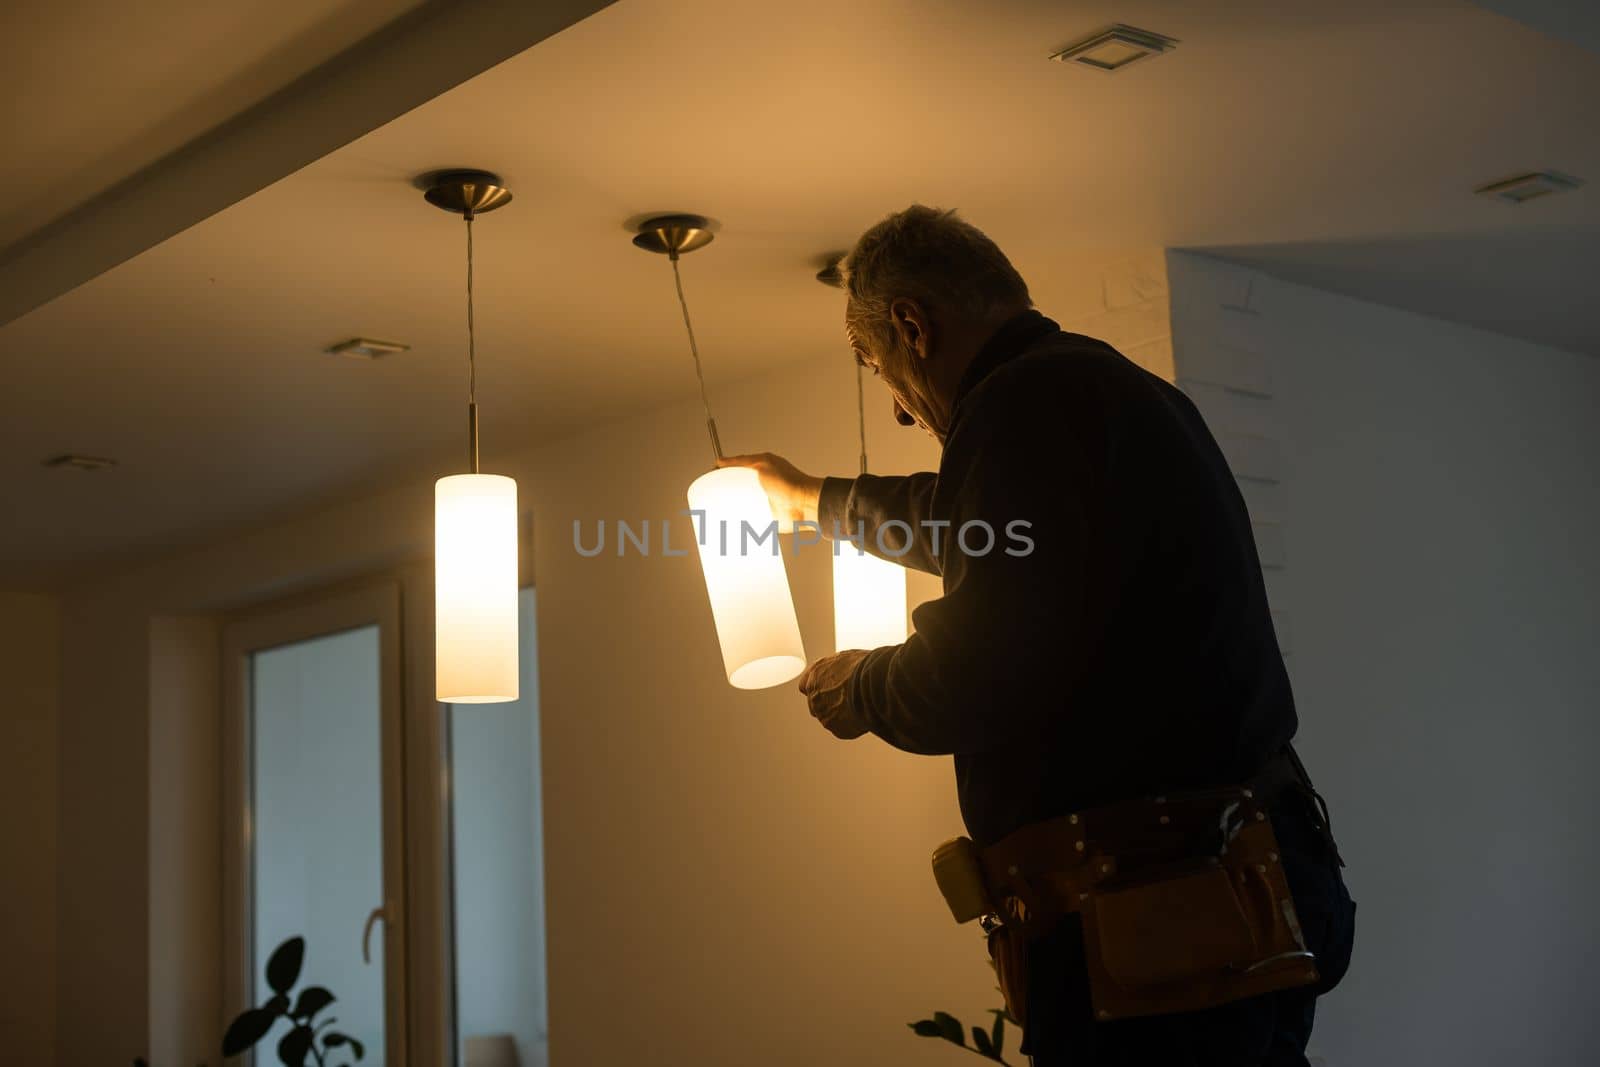 A male electrician changes the light bulbs in the ceiling light. men's household duties. care of electrical appliances at home.